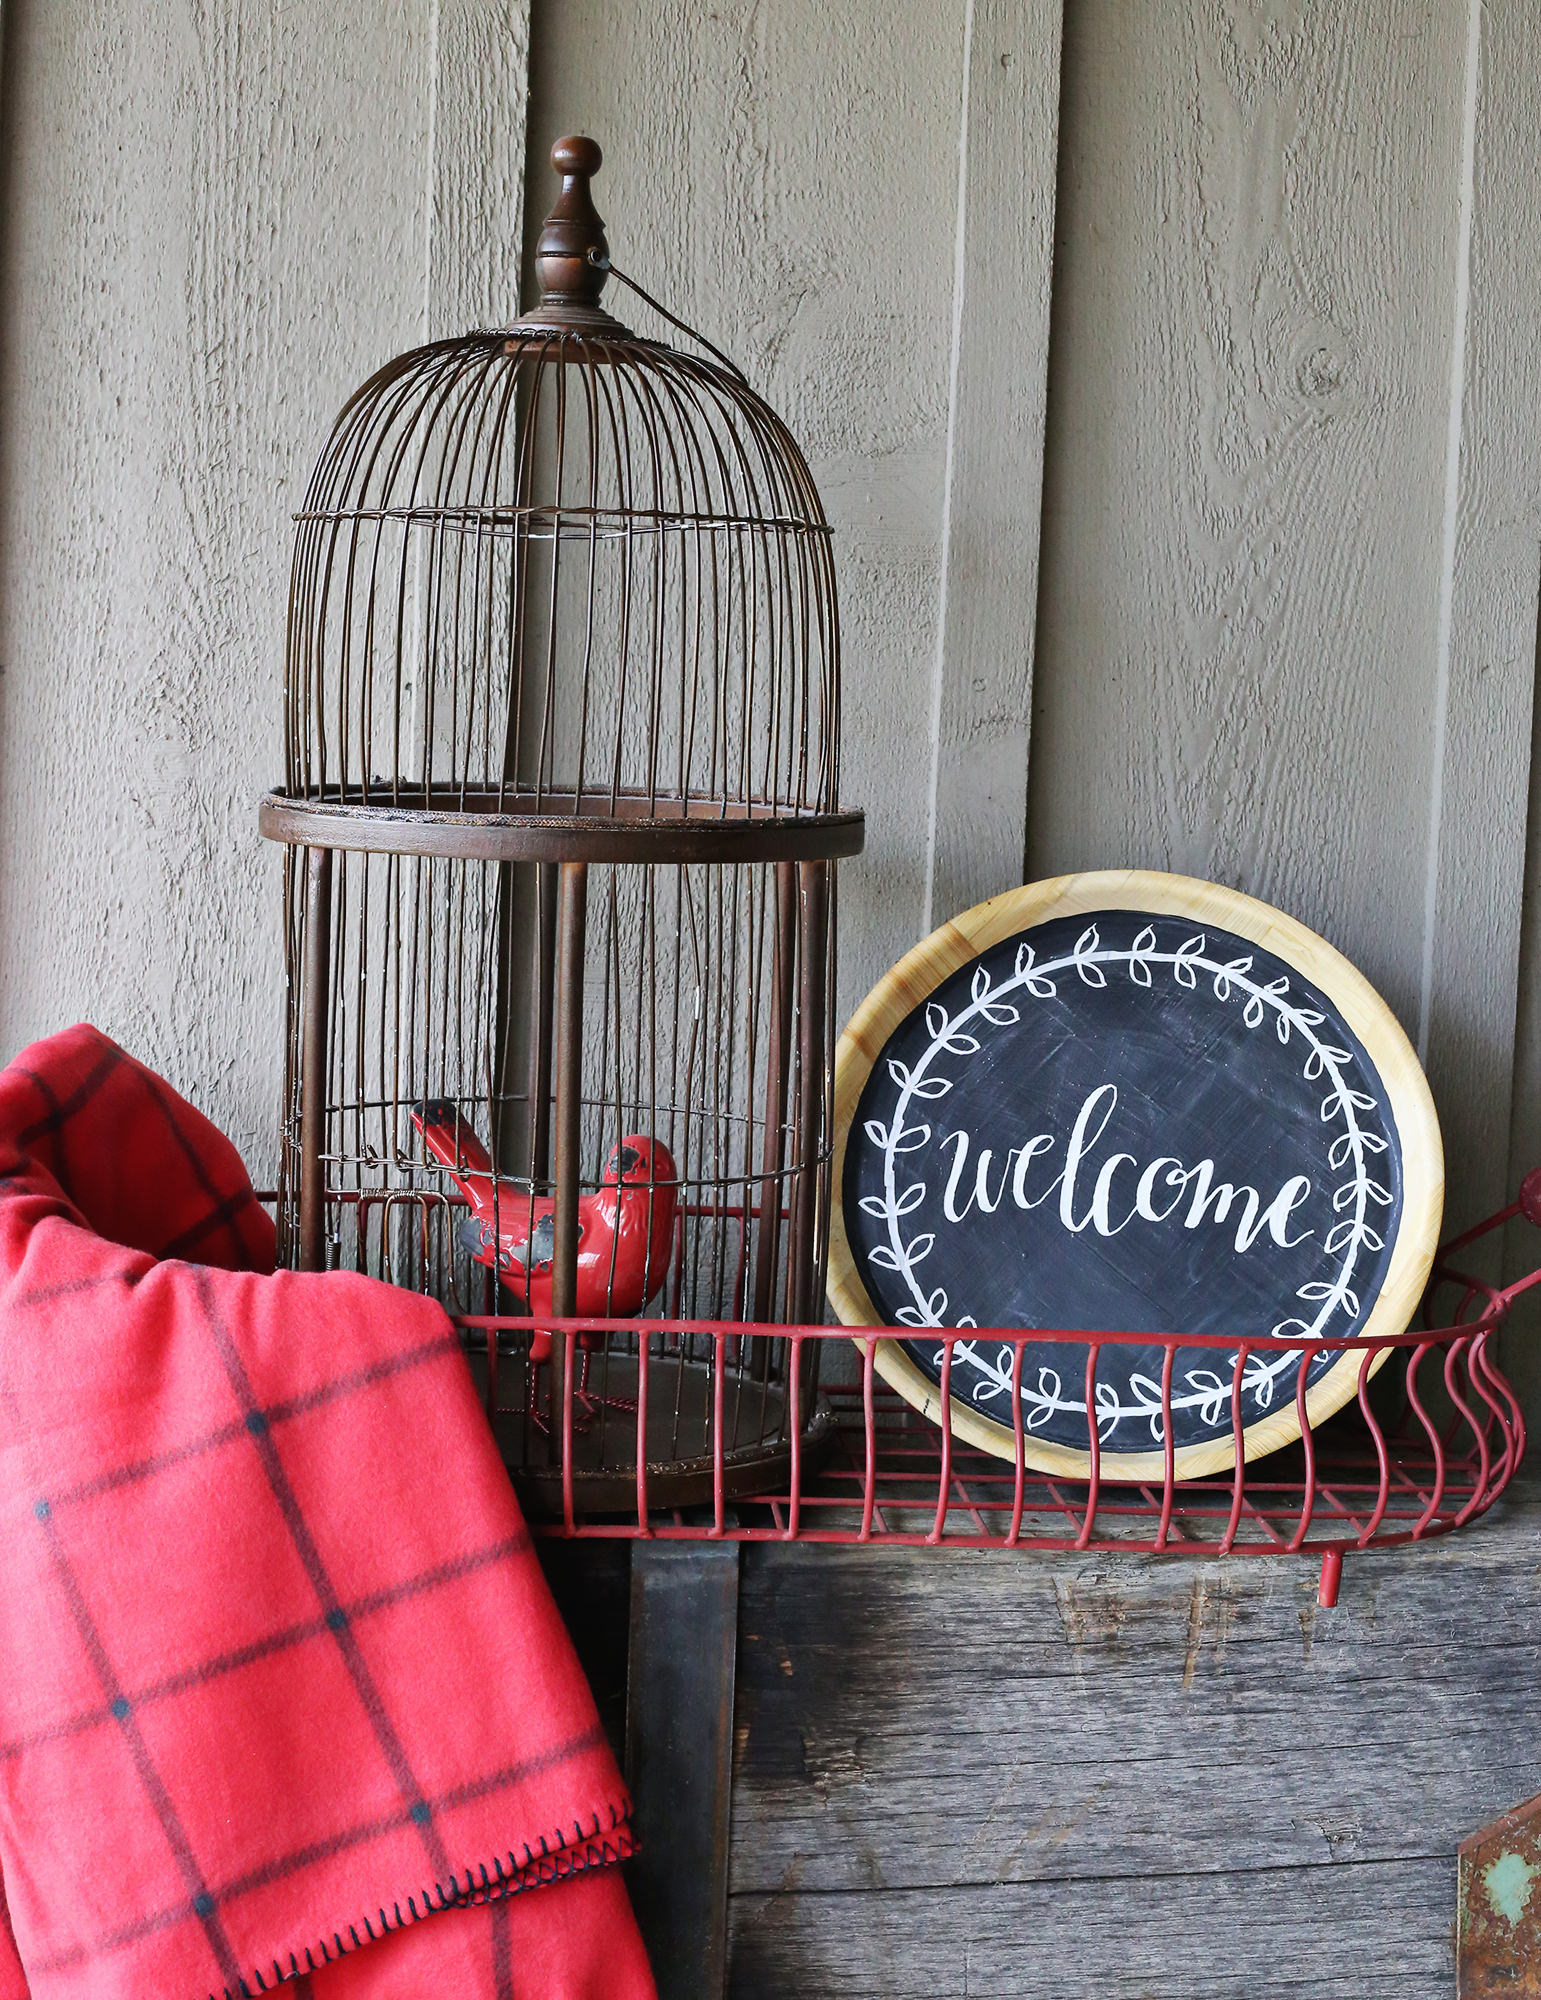 Transform thrift store finds into unique chalkboards for your home decor